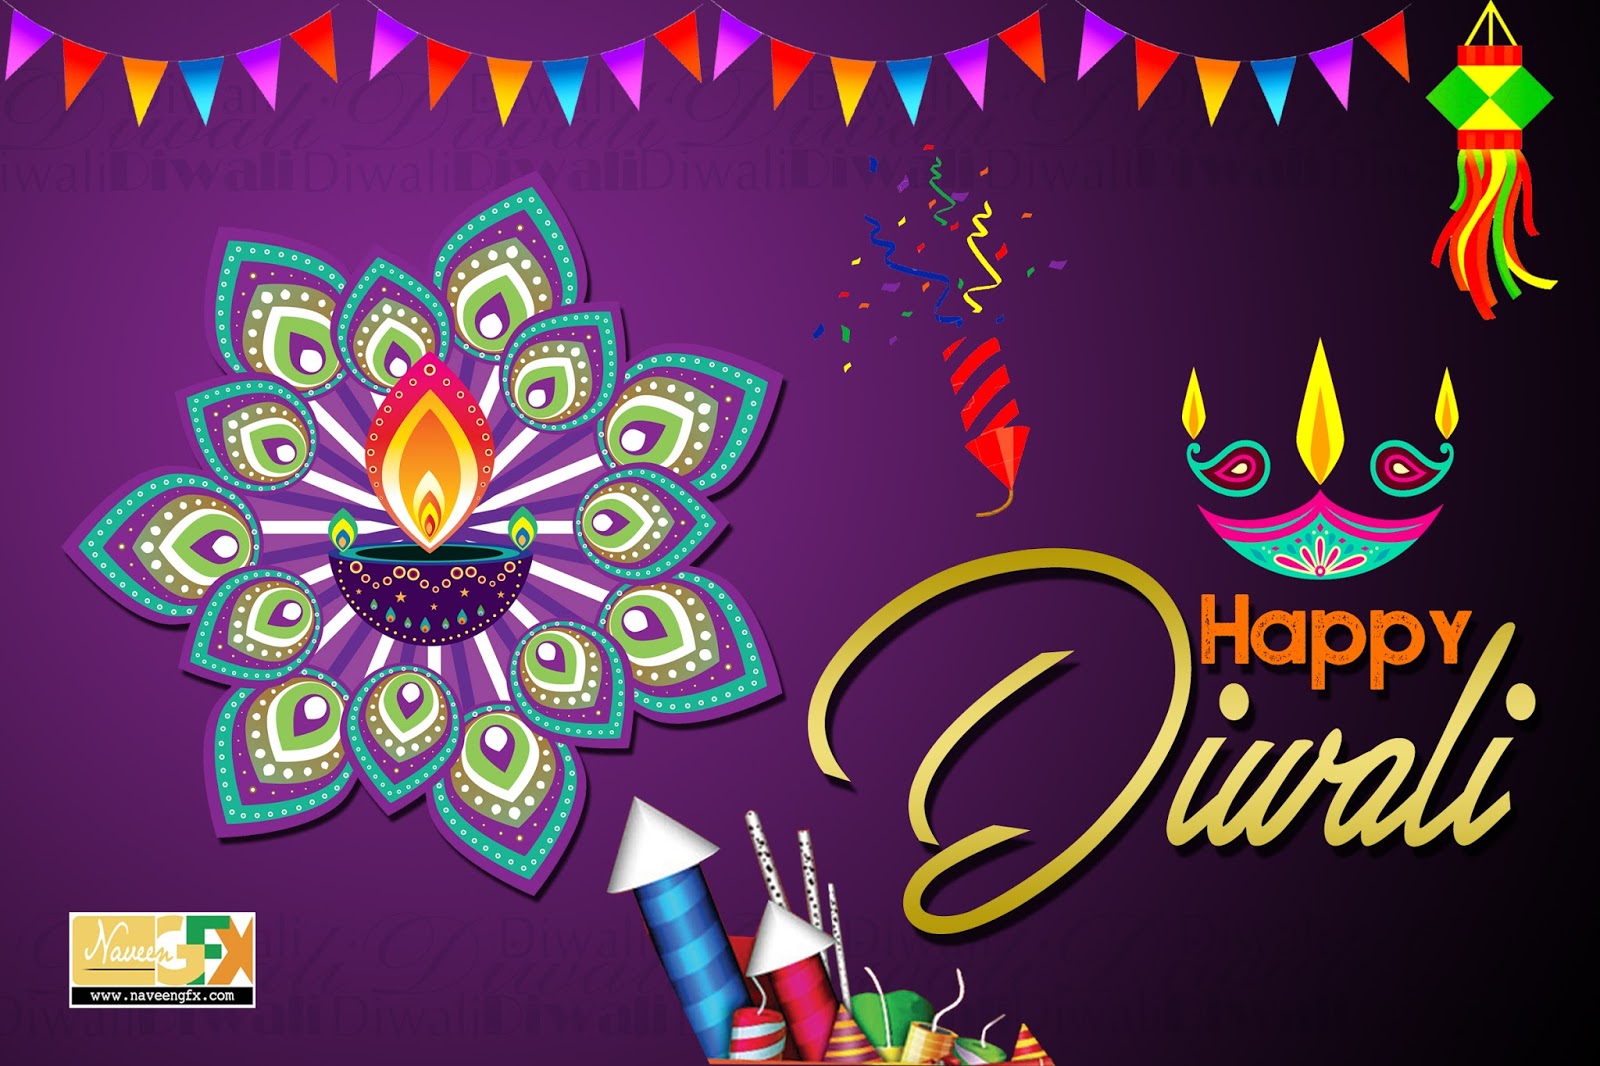 happy diwali wishes quotes and greetings hd wallpapers | naveengfx